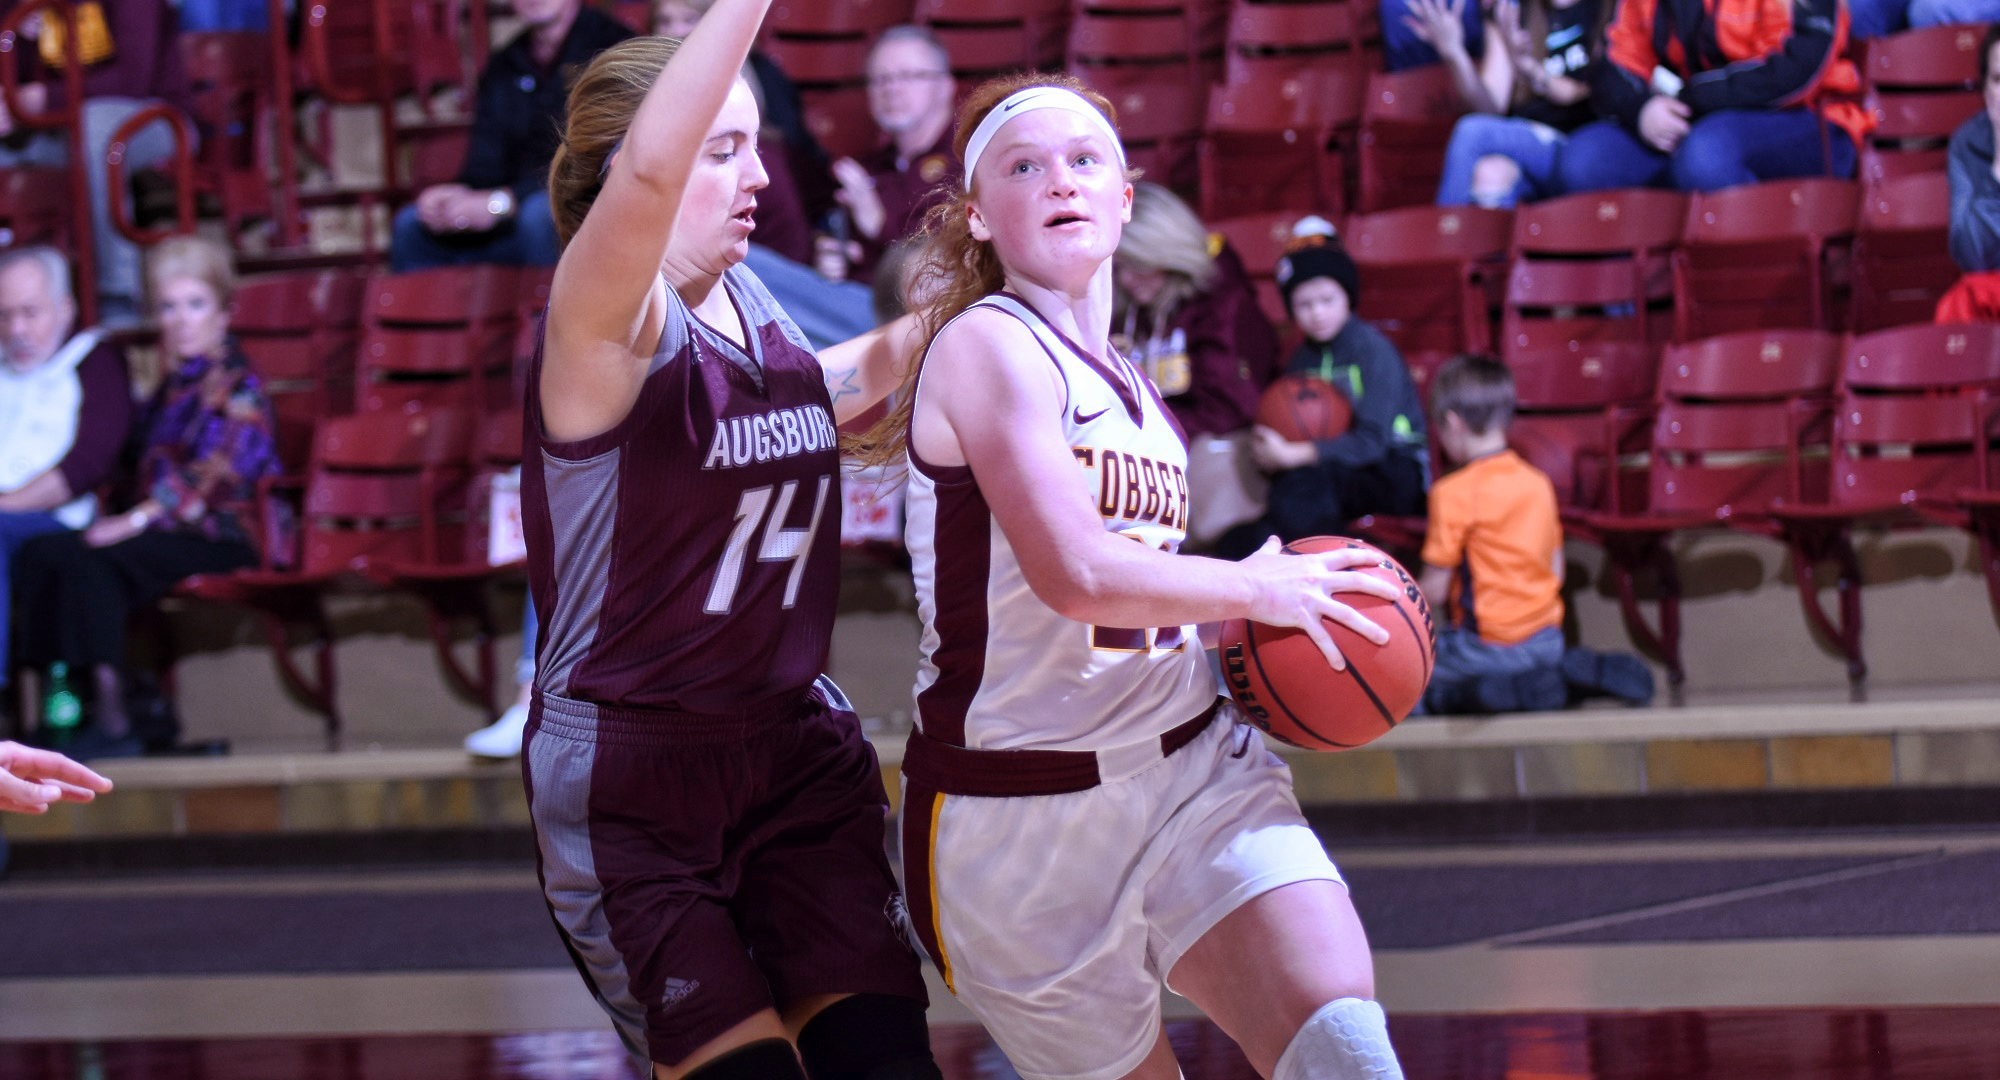 Junior guard Rachel Hoernemann drives to the basket in the first half of the Cobbers' MIAC opener against Augsburg. She had a team-high four assists.